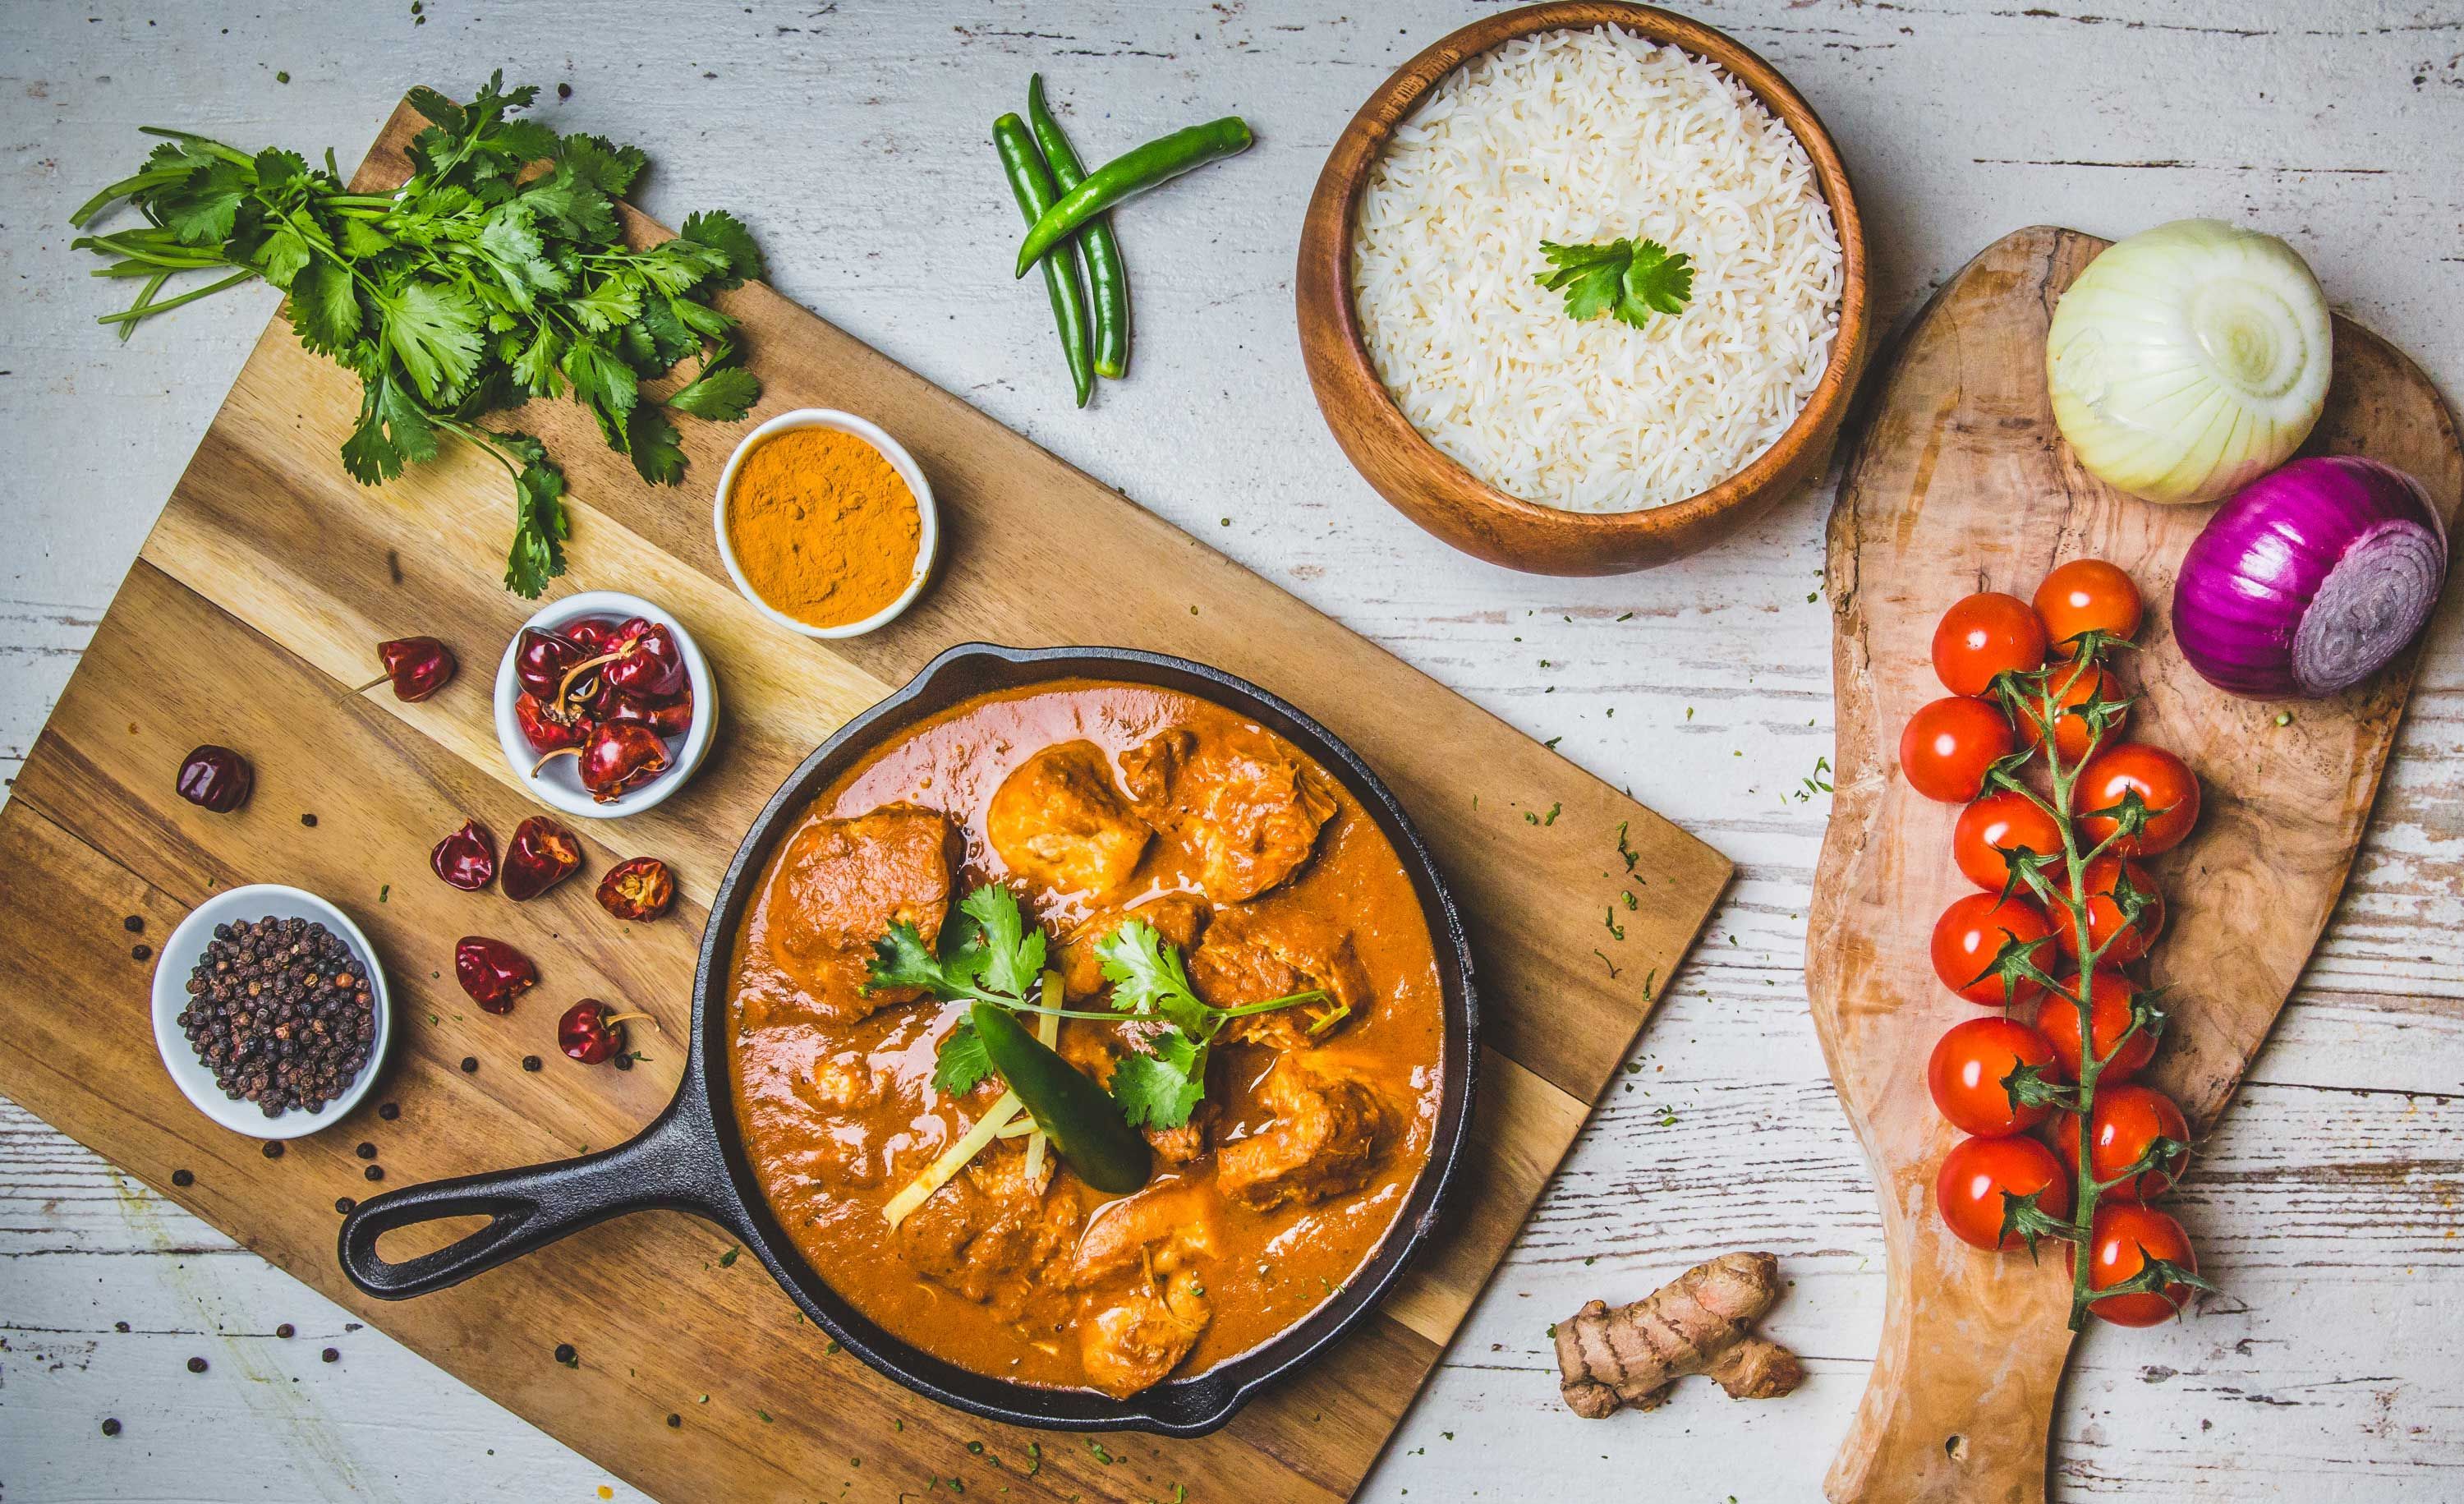 Trending Popular. Food photography, Curry, Food